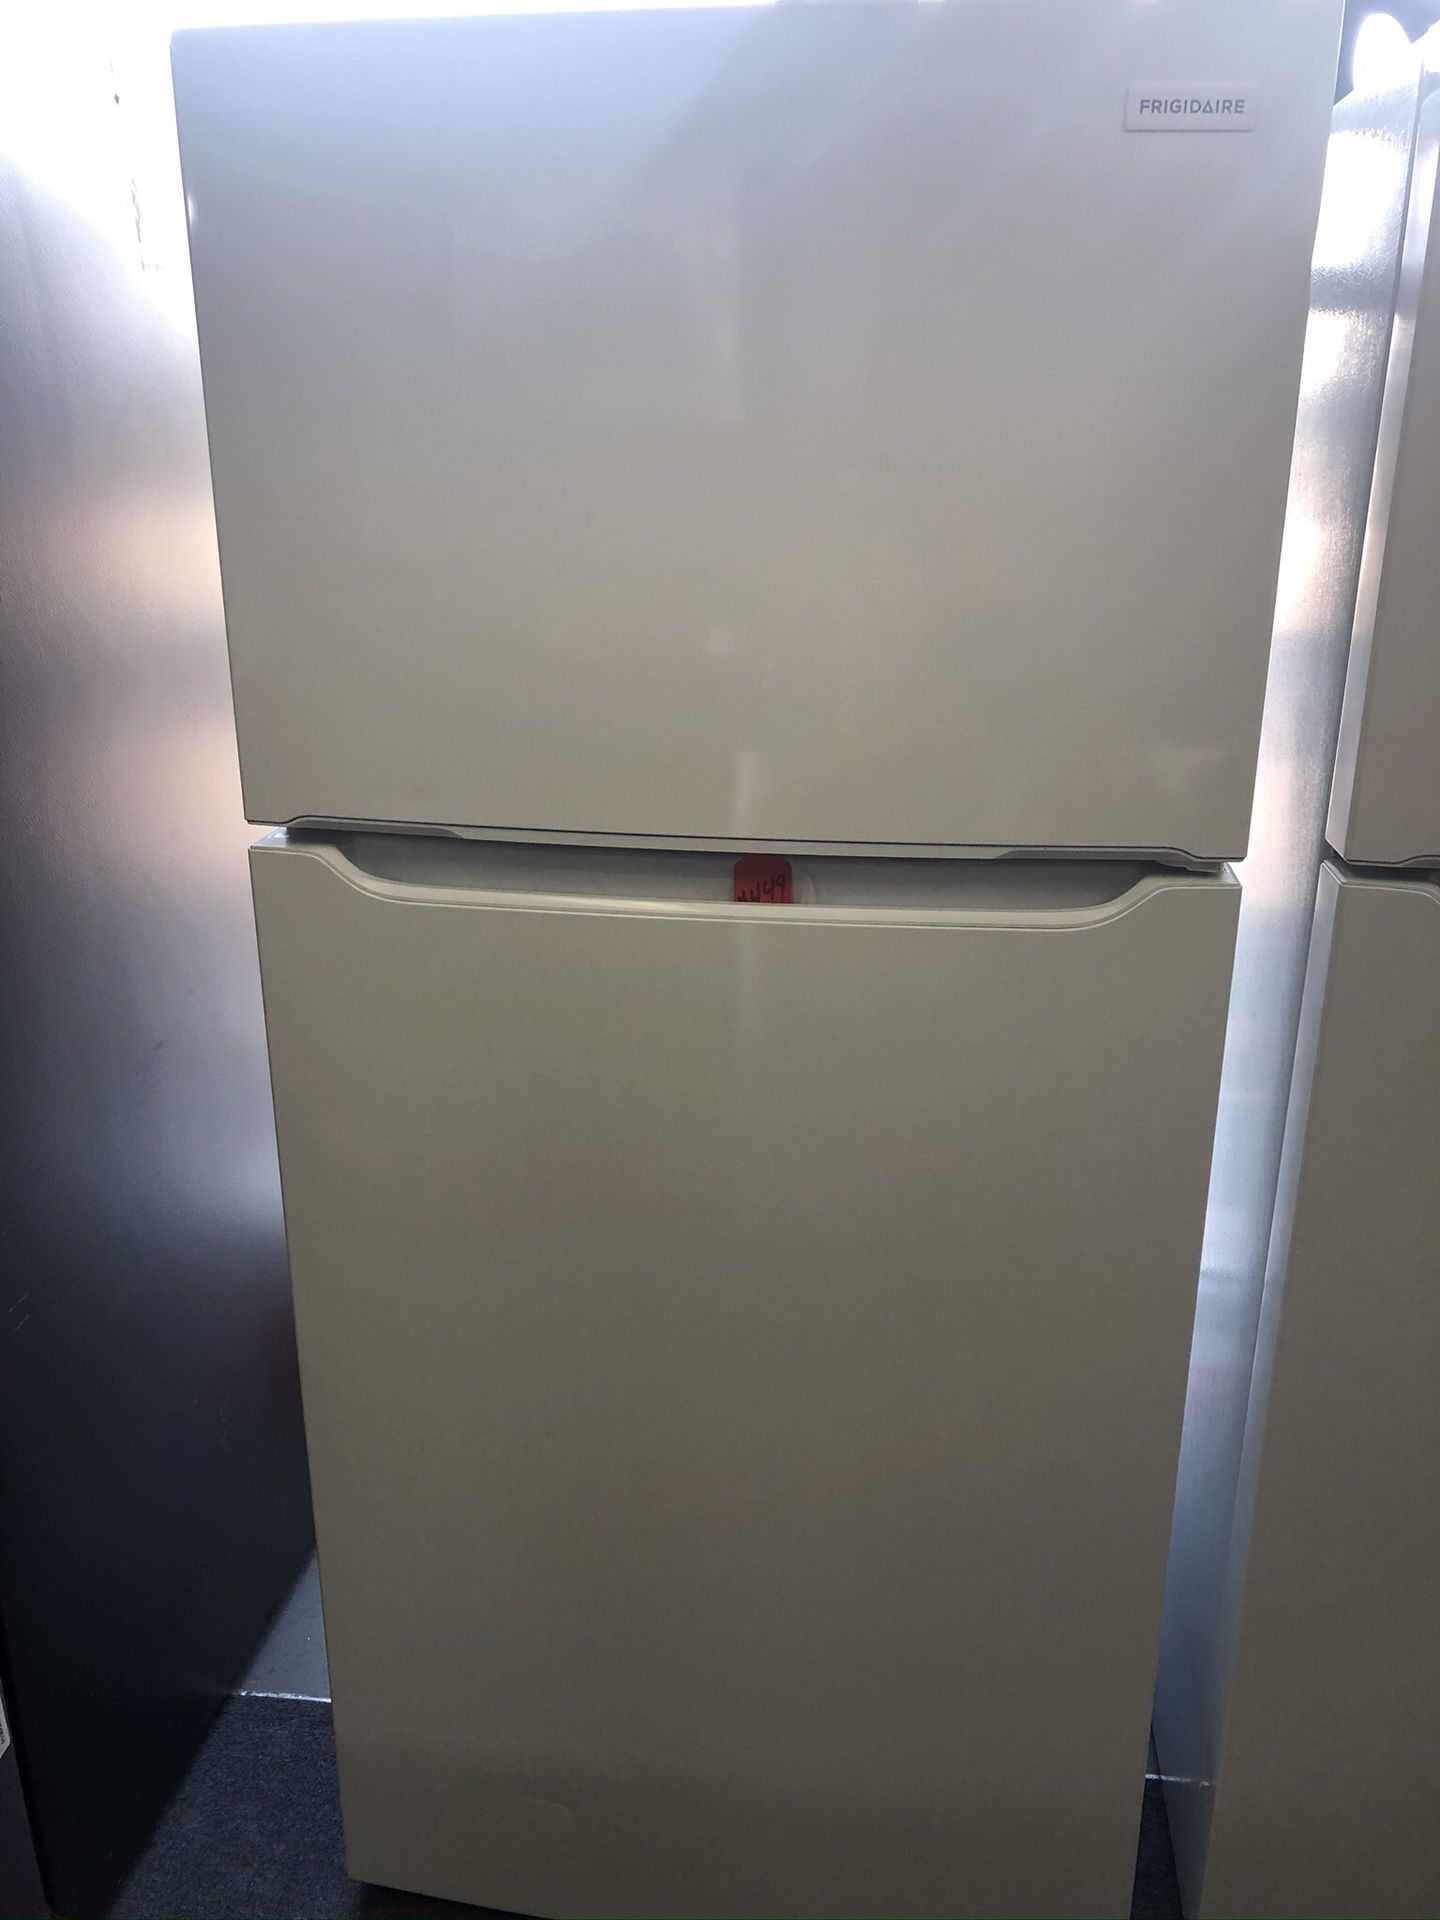 New scratch and dent Frigidaire 17 cu ft top and bottom fridge. 1 year warranty